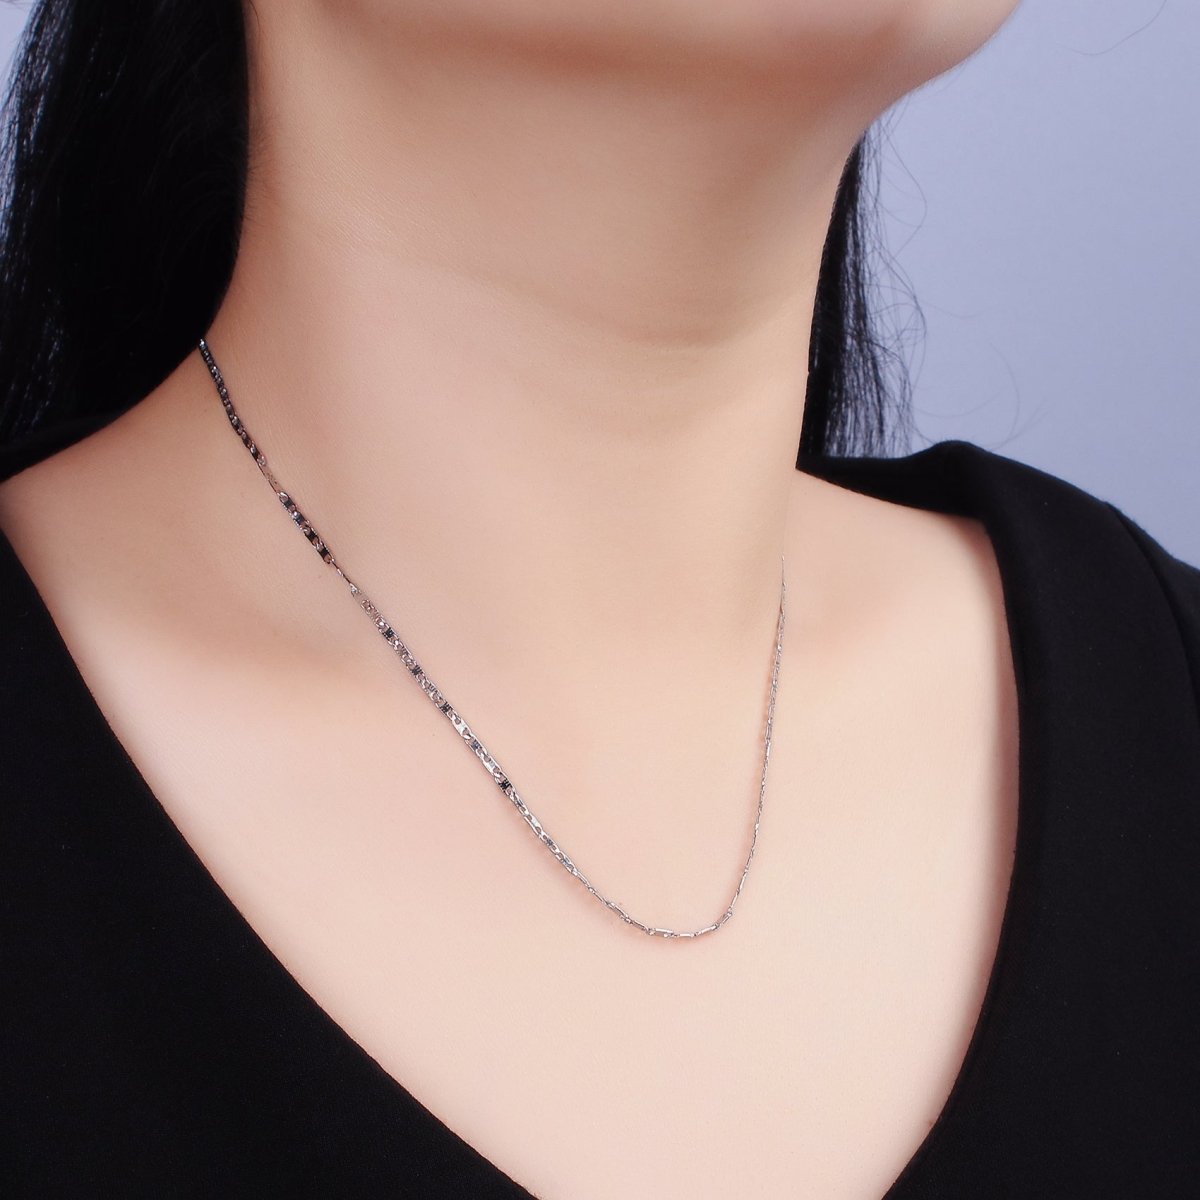 Dainty Mariner Anchor Chain Necklace for Women Stainless Steel Necklace 18 inch long | WA-2101 Clearance Pricing - DLUXCA